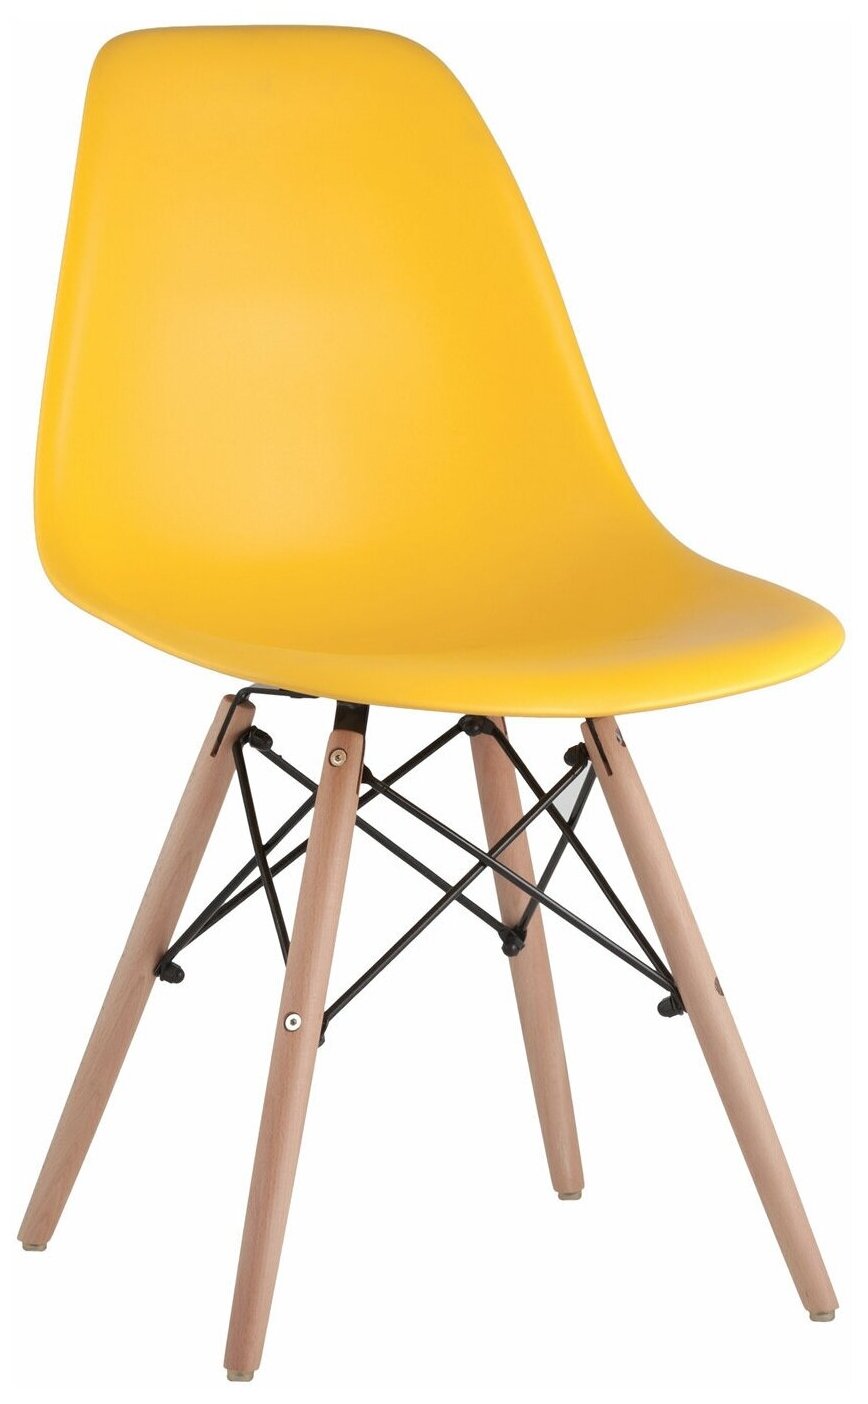  STOOL GROUP Eames DSW,  /, : 